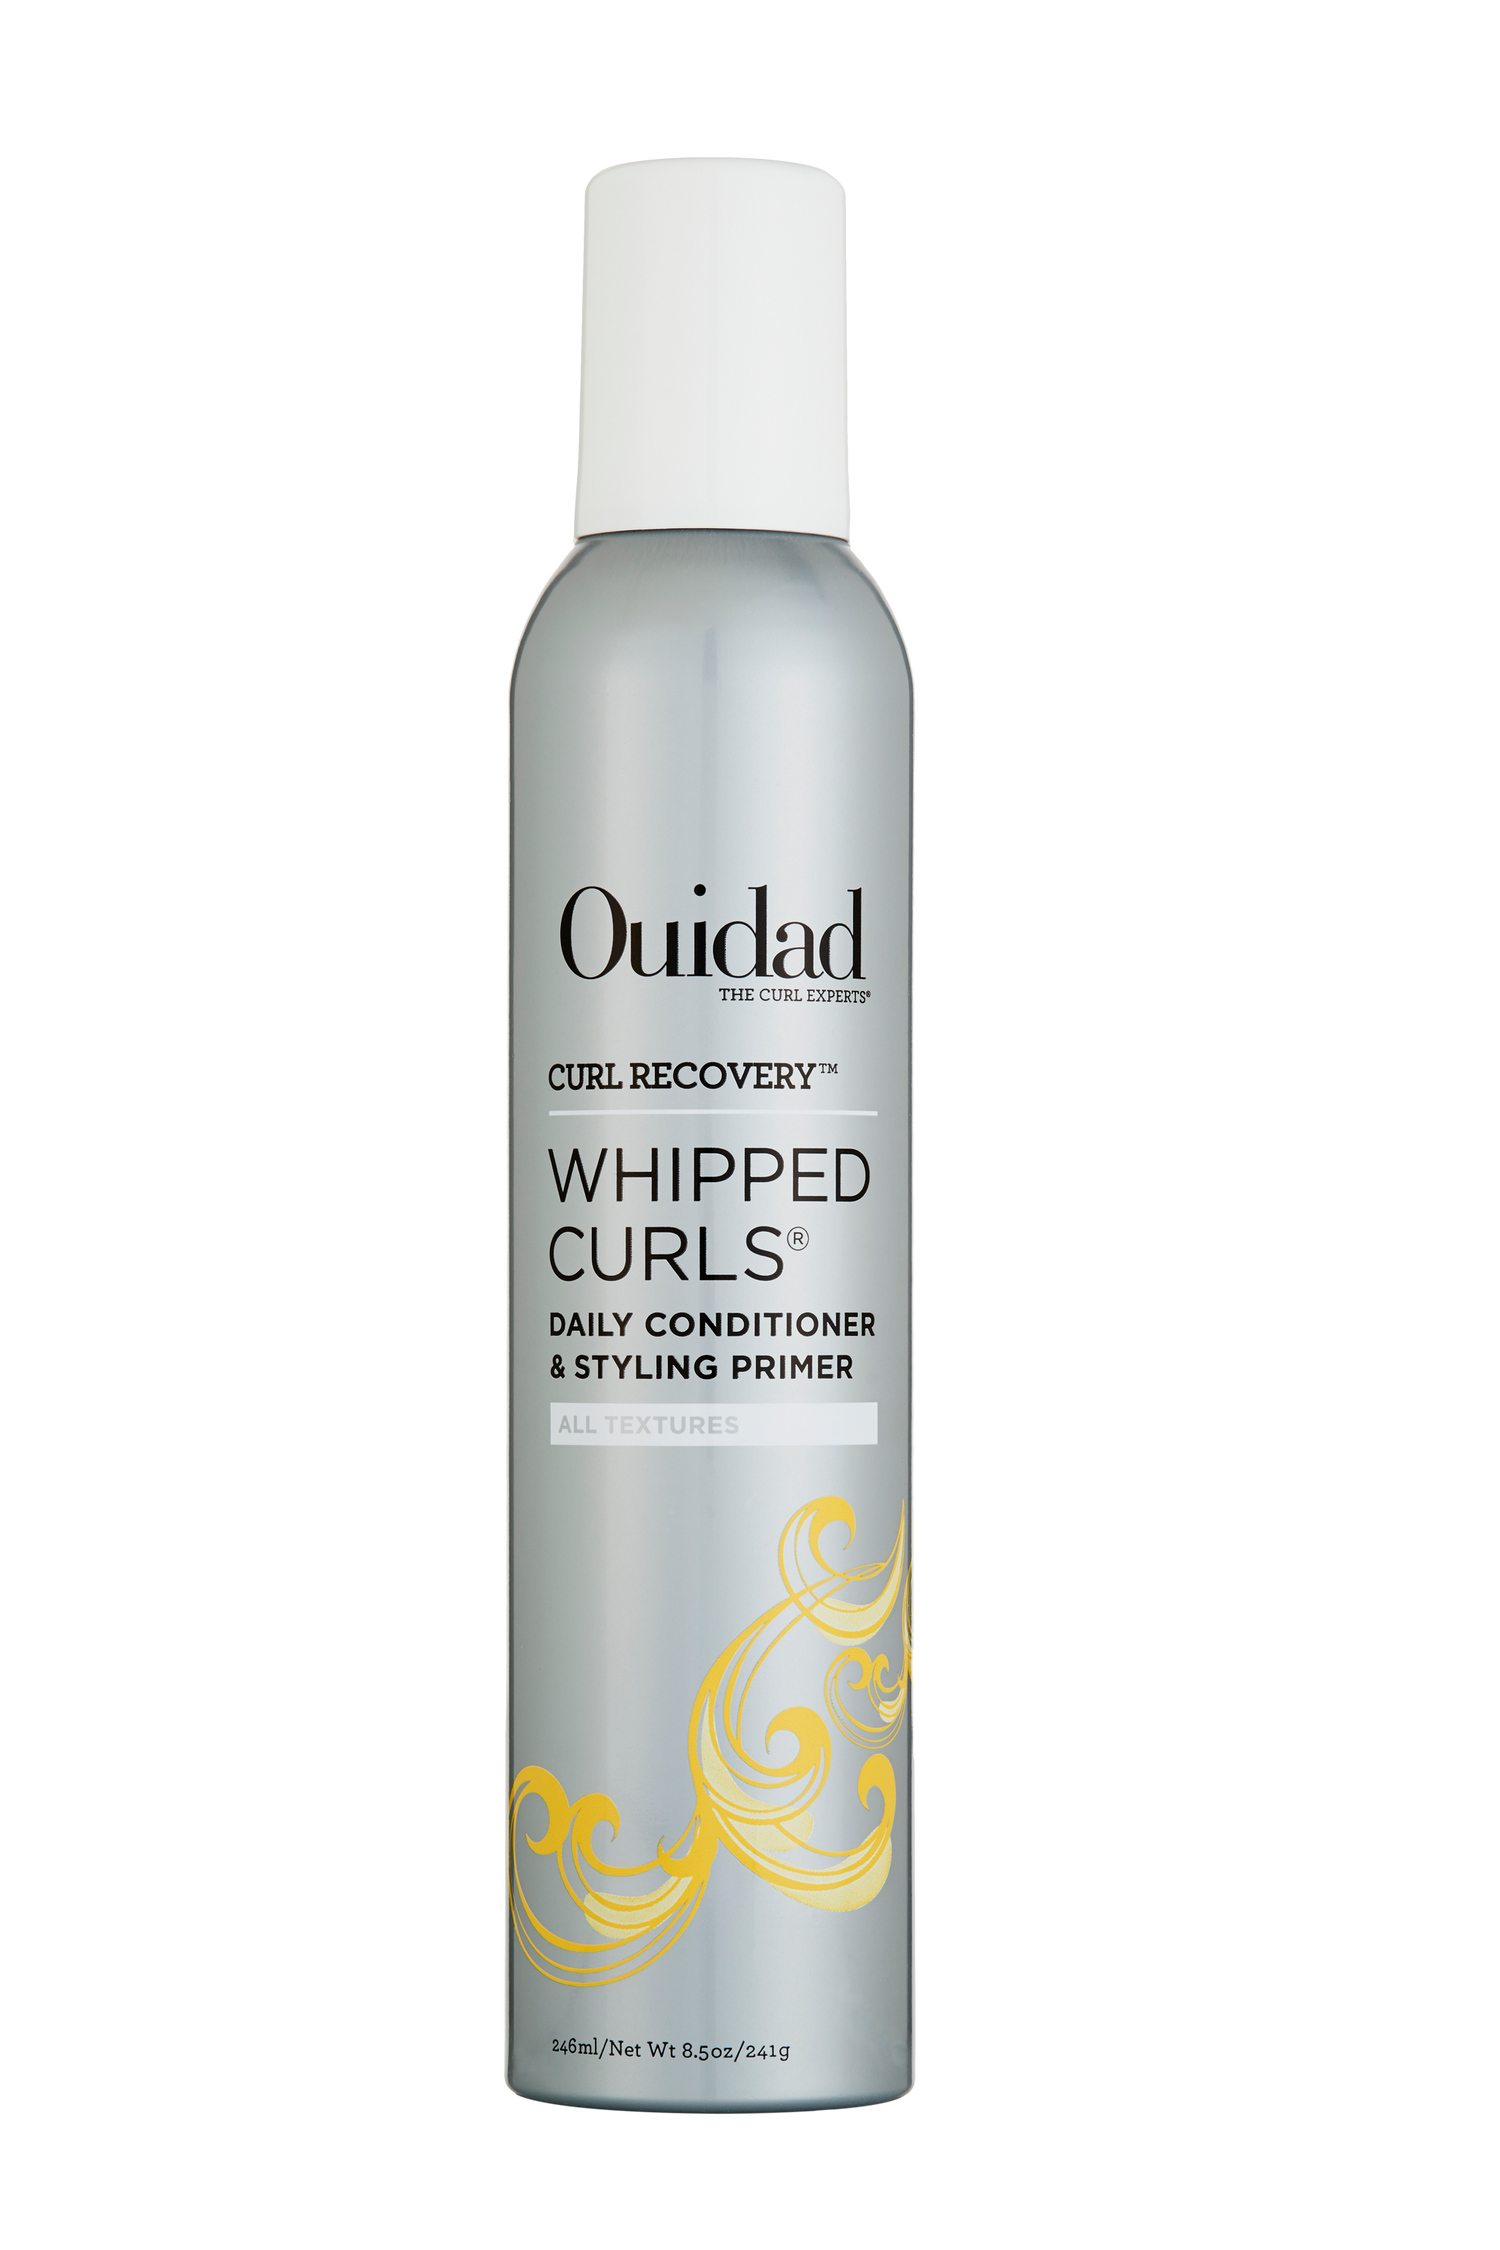 Ouidad Recovery Whipped Curls Daily Conditioner and Primer